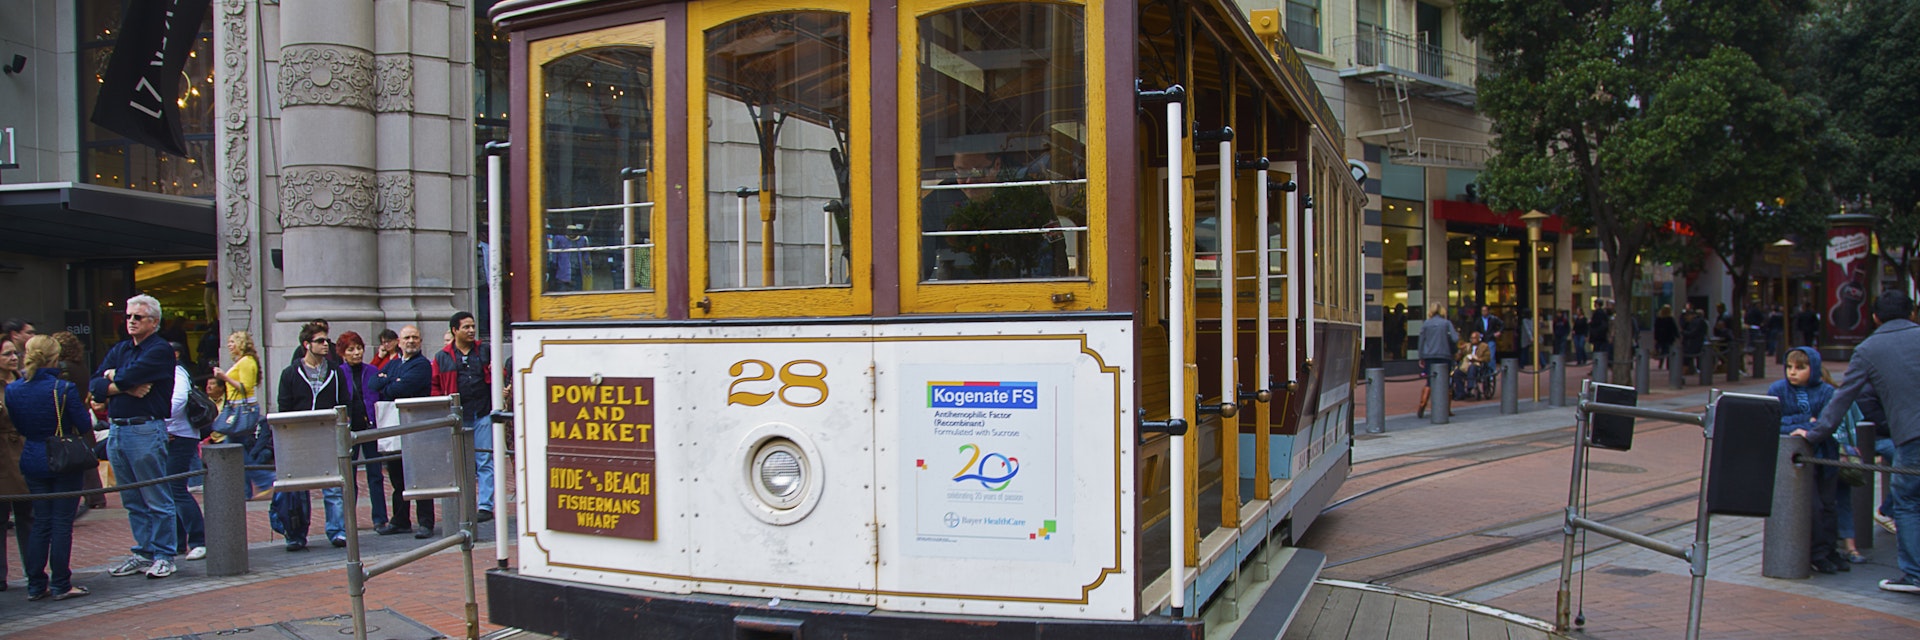 Cable car at turntable on Powell Street at Market Street, San Francisco, California